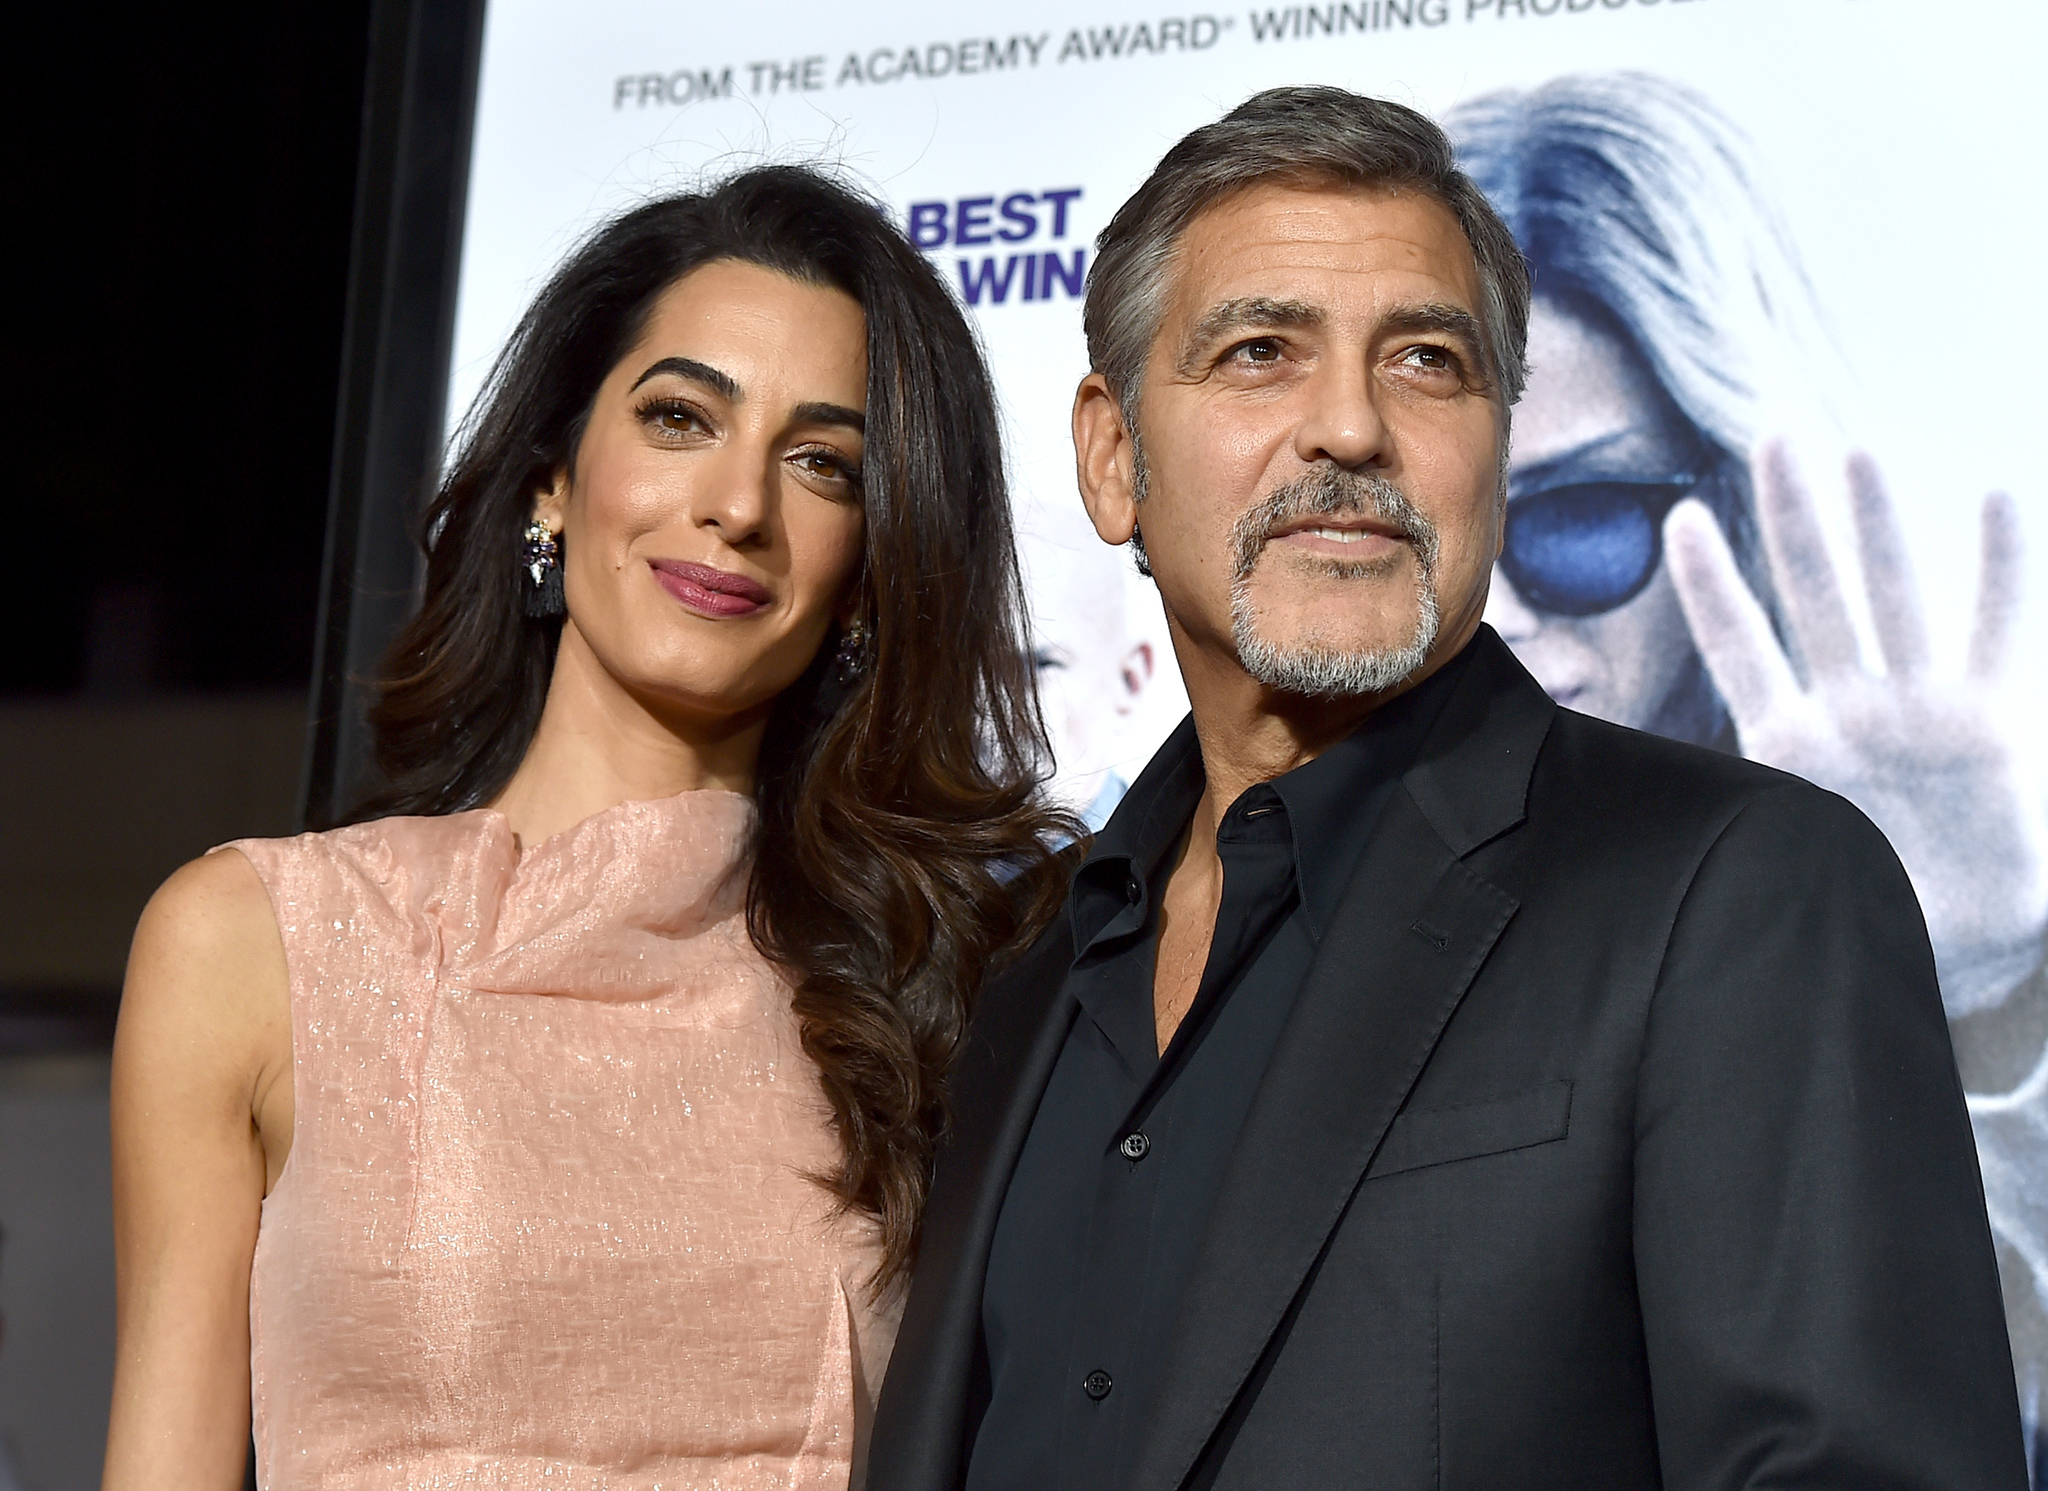 George Clooney at event of Our Brand Is Crisis (2015)